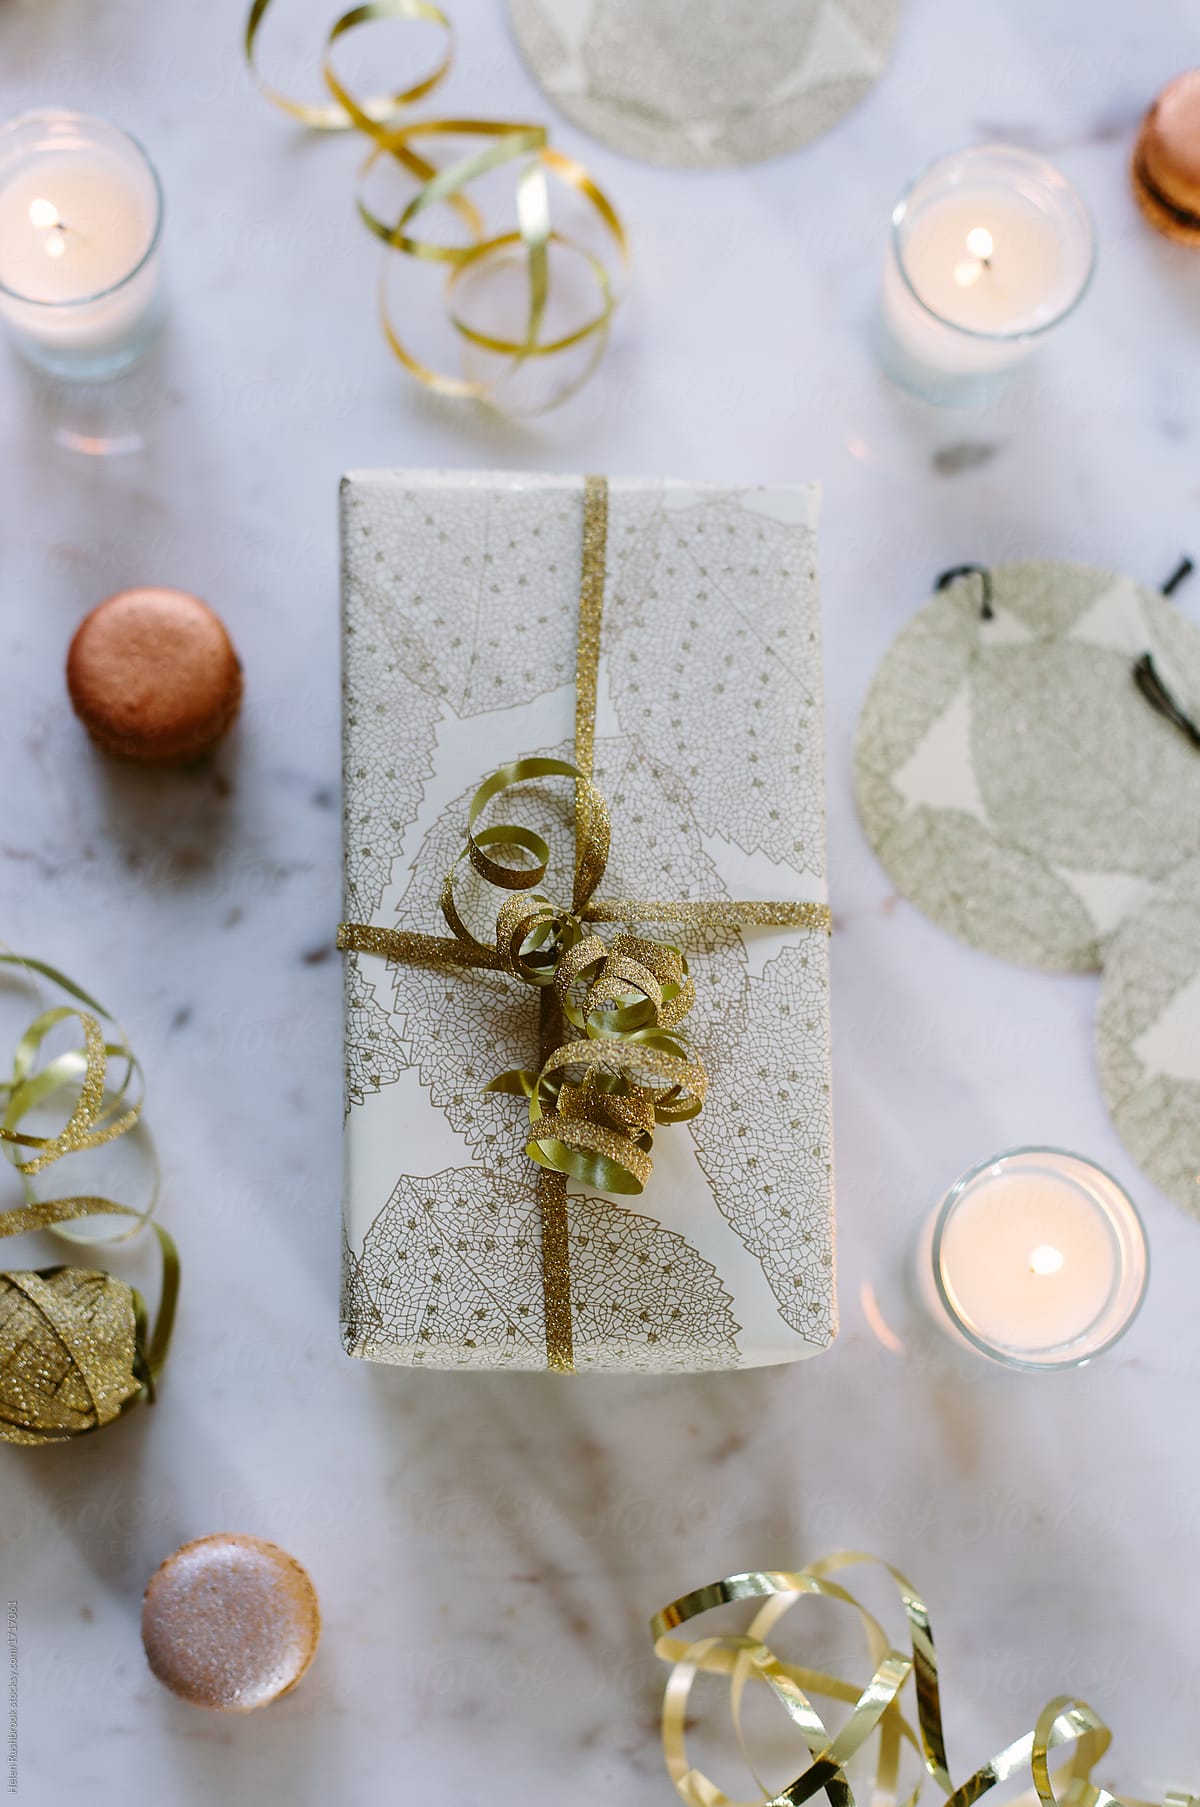 Gold theme wrapped Christmas gift with ribbon, candles and macaroons.